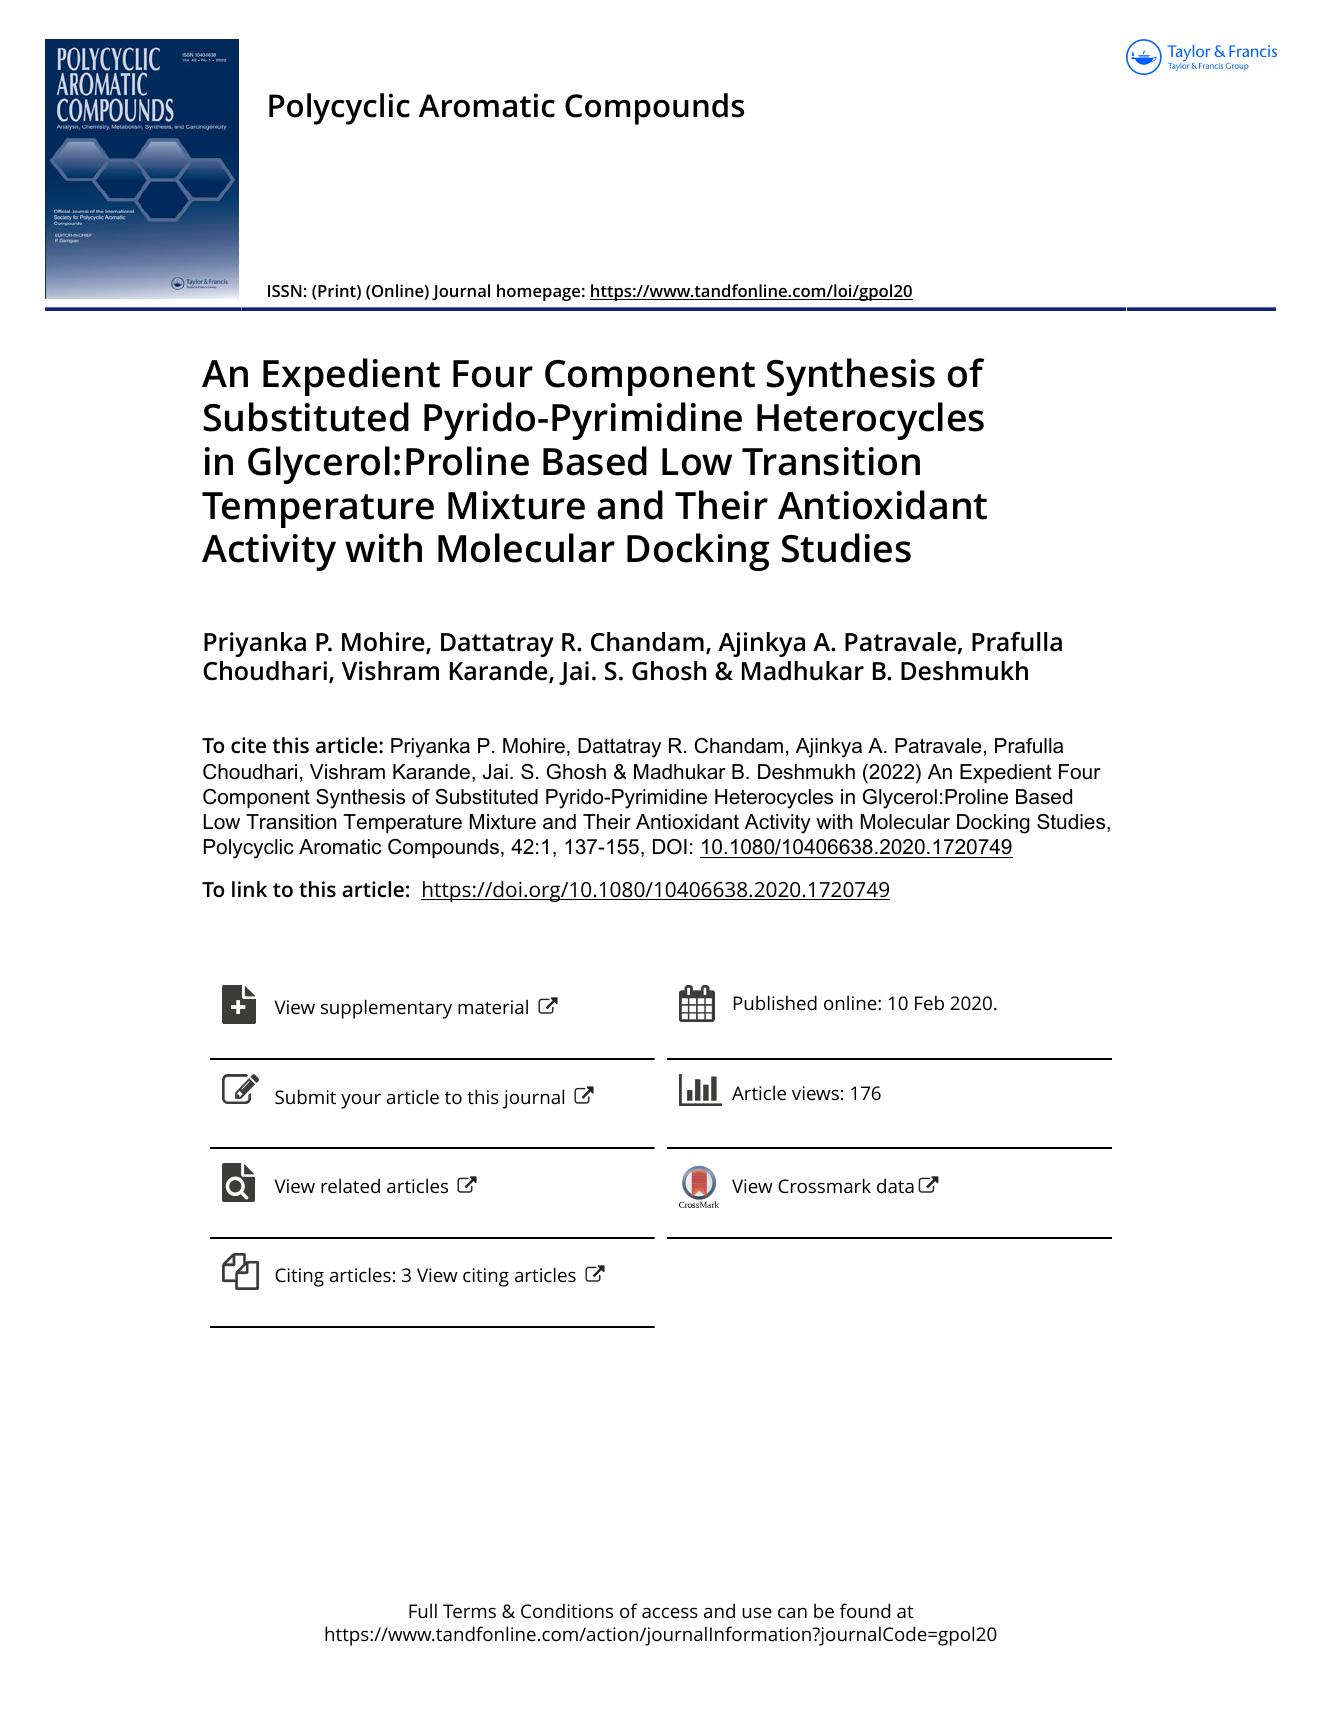 An Expedient Four Component Synthesis of Substituted Pyrido-Pyrimidine Heterocycles in Glycerol:Proline Based Low Transition Temperature Mixture and Their Antioxidant Activity with by unknow